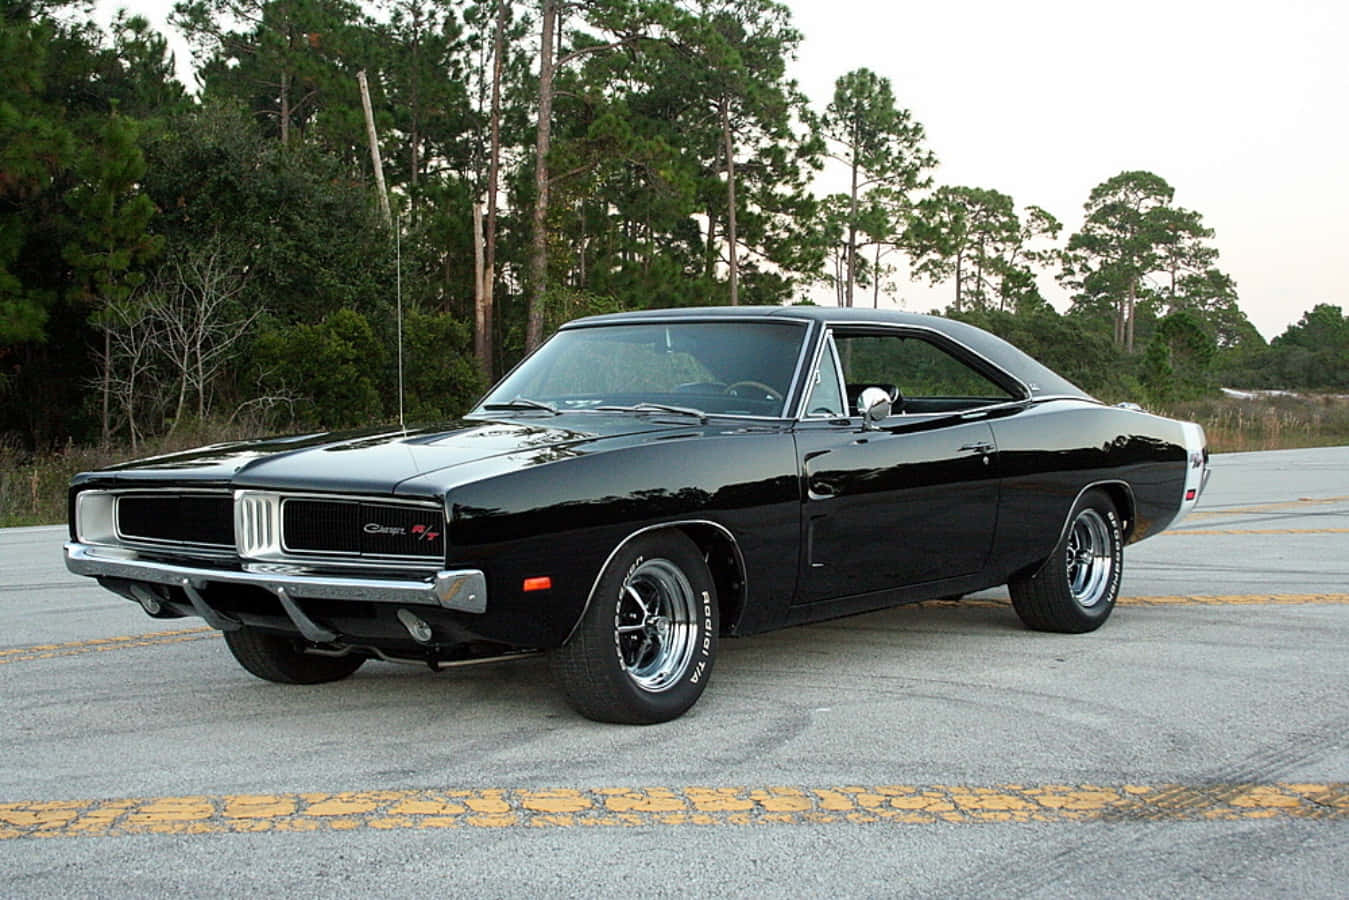 A Black Muscle Car Is Parked On The Road